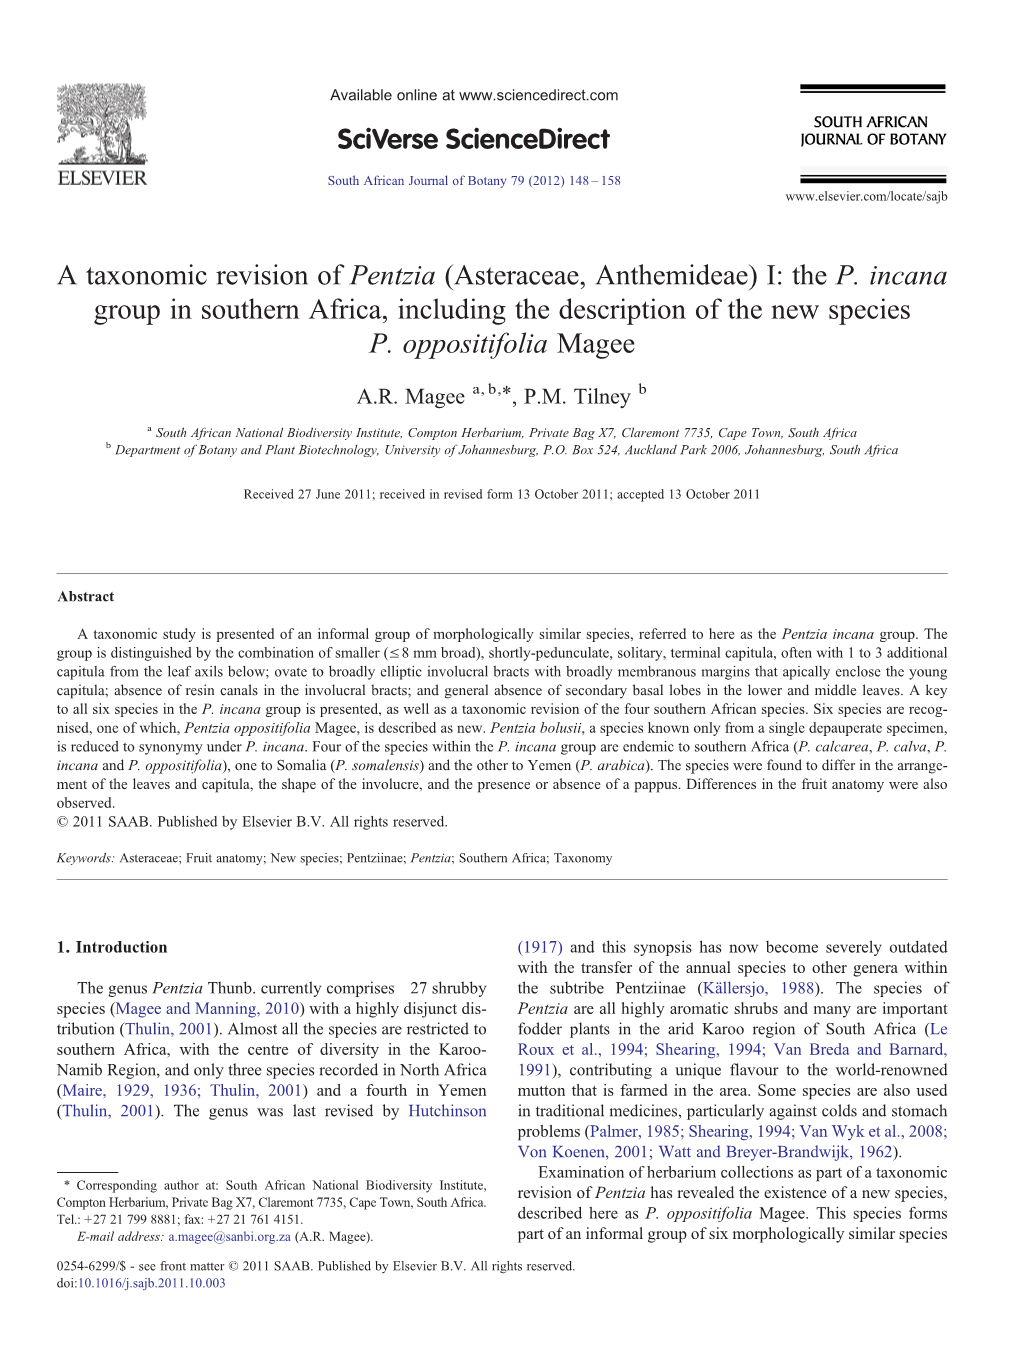 A Taxonomic Revision of Pentzia (Asteraceae, Anthemideae) I: the P